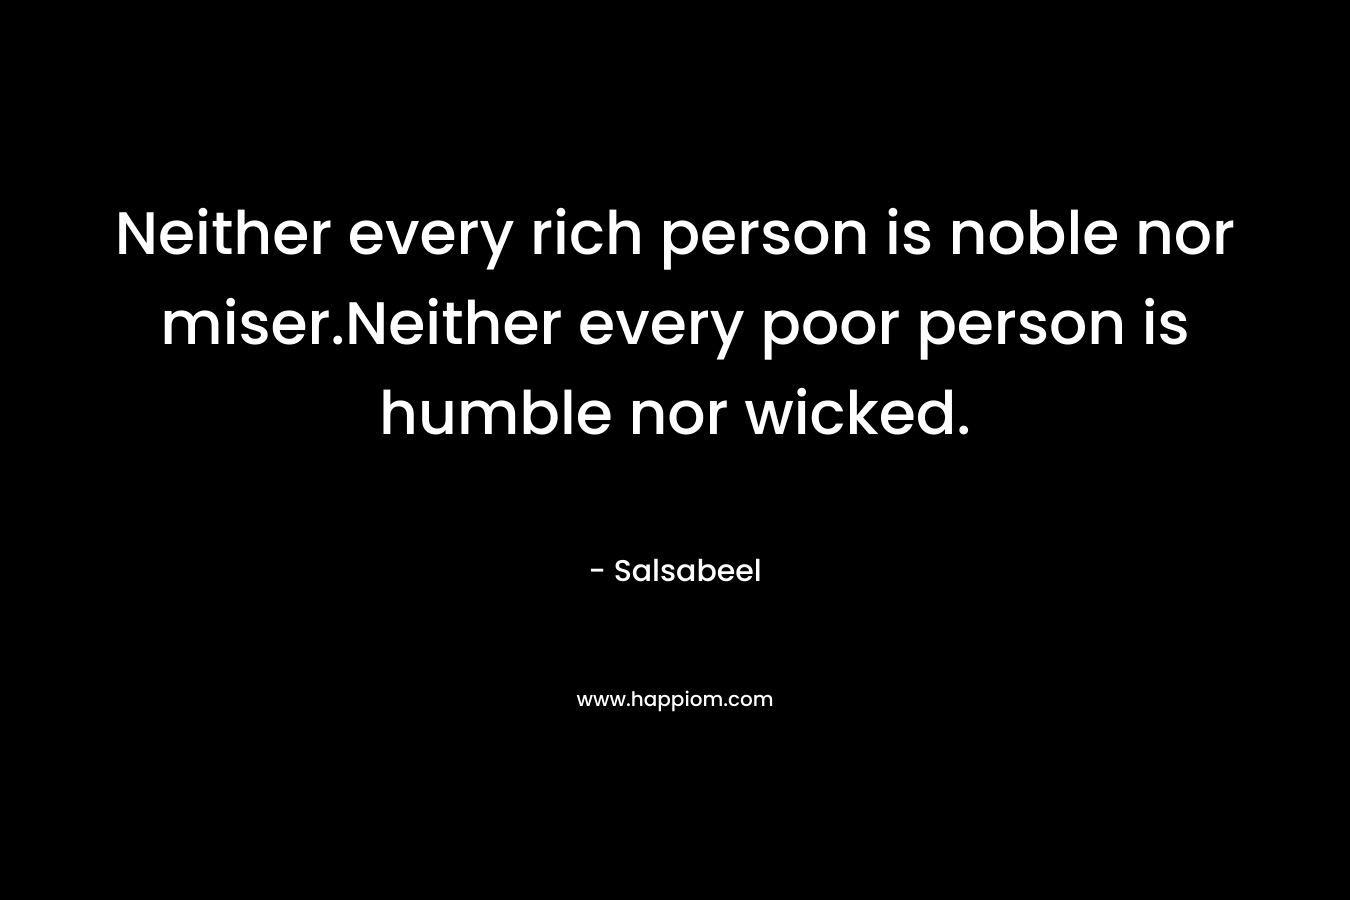 Neither every rich person is noble nor miser.Neither every poor person is humble nor wicked.